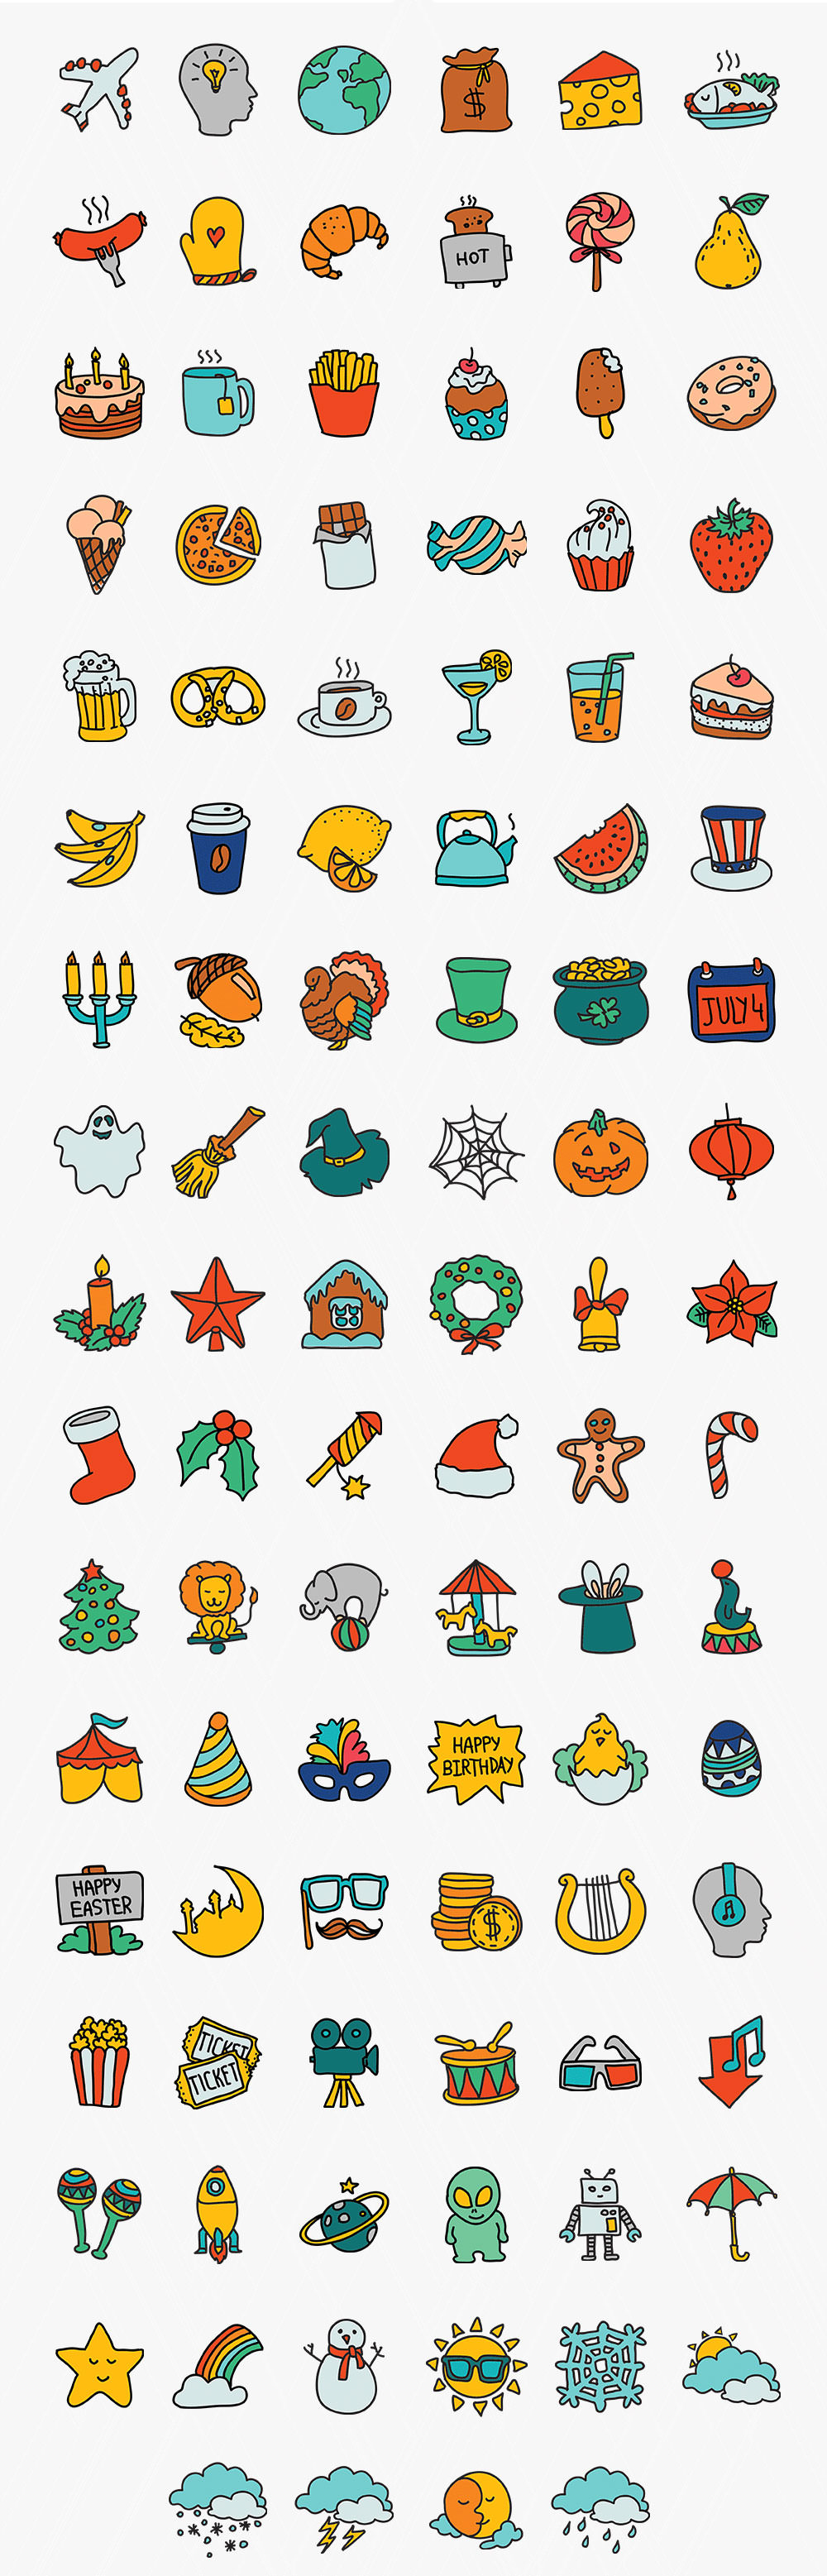 doodle-icons